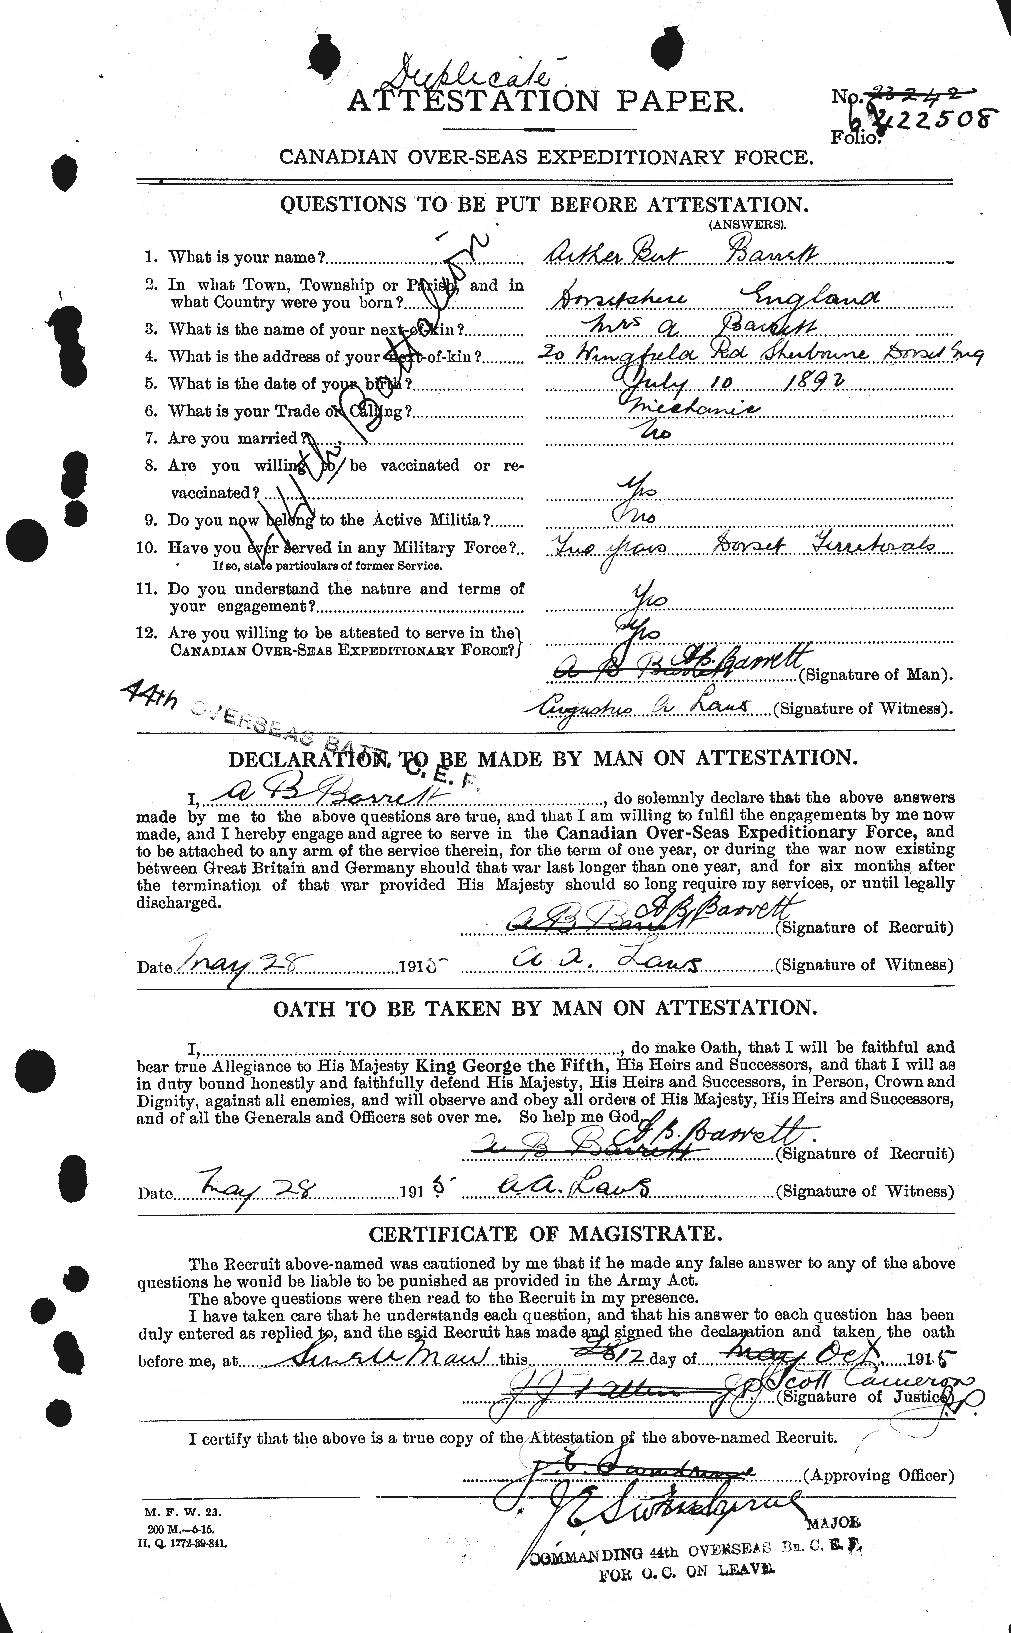 Personnel Records of the First World War - CEF 222247a